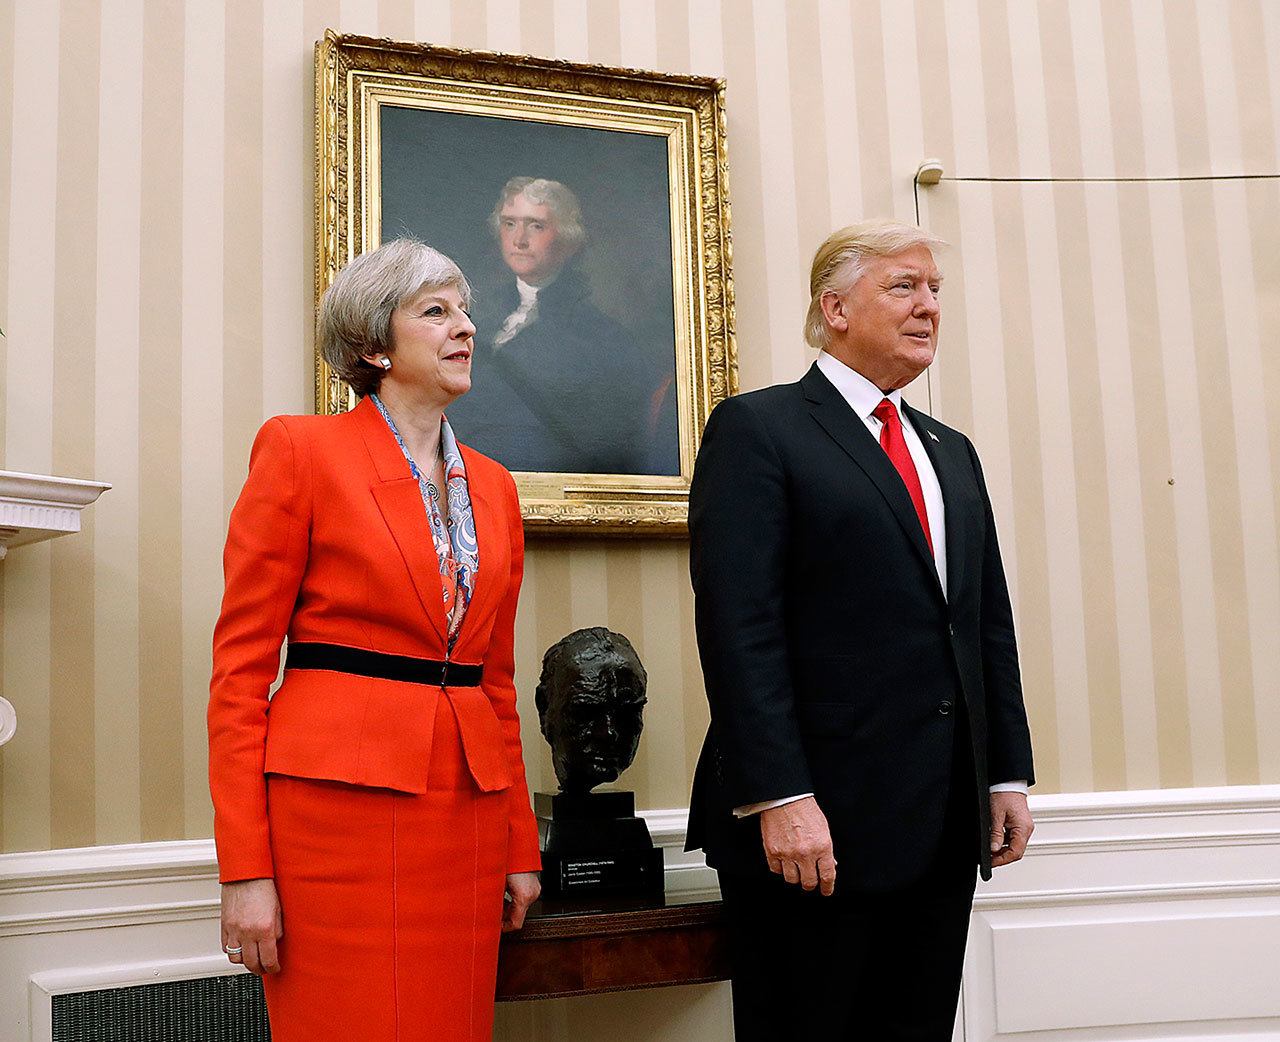 President Donald Trump stands with British Prime Minister Theresa May on Friday, Jan. 27, in the Oval Office of the White House in Washington. (AP Photo/Pablo Martinez Monsivais)